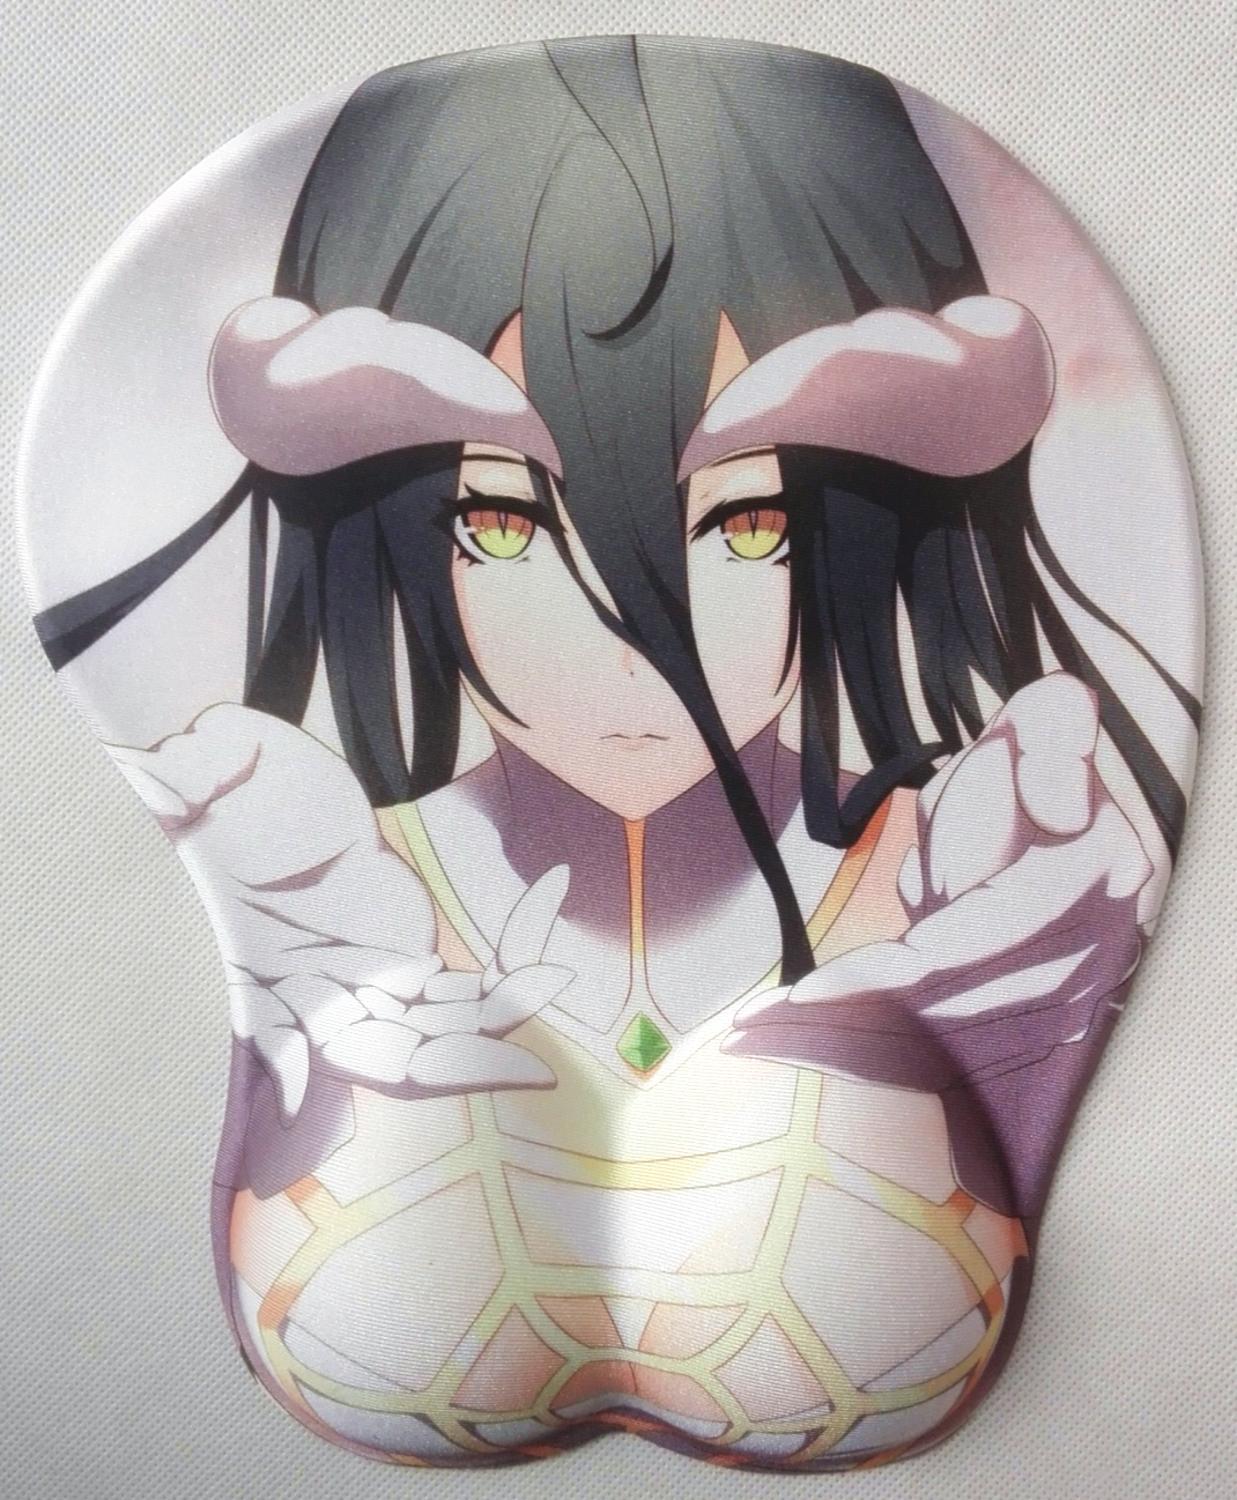 Overlord – Albedo Themed Cute Silicone Mousepad Keyboard & Mouse Pads